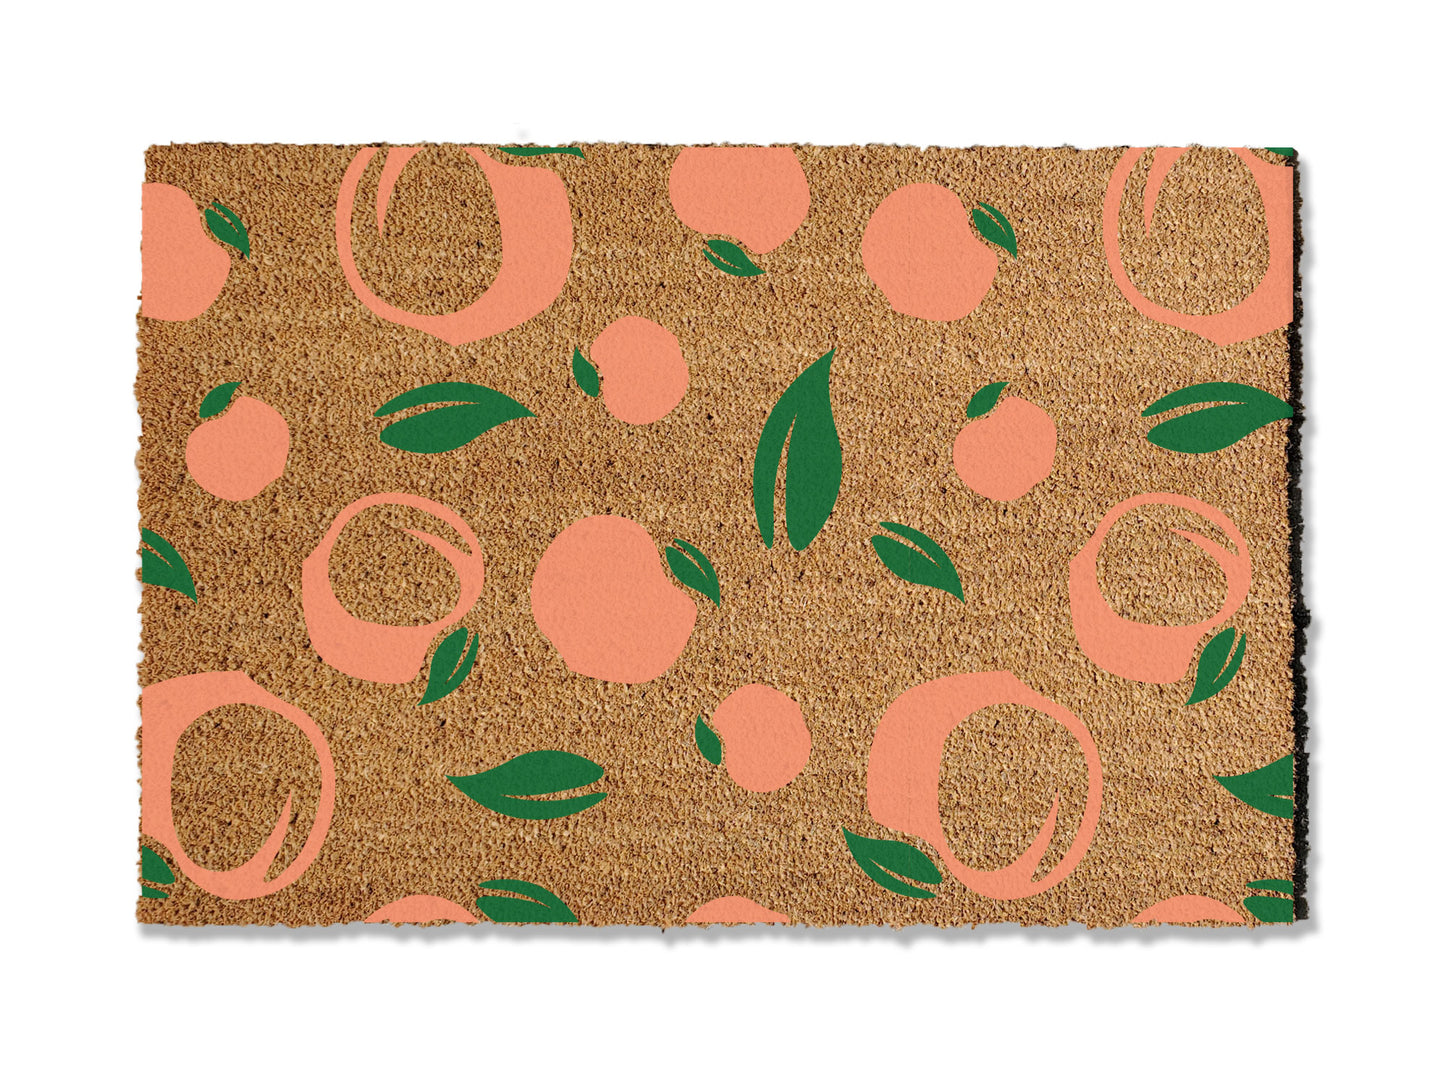 Elevate your entryway with our coir doormat adorned with a colorful peach pattern. The perfect addition to your home, this vibrant mat is available in multiple sizes and excels at trapping dirt. Bring a touch of freshness and style to your doorstep with this functional and aesthetically pleasing coir doormat.